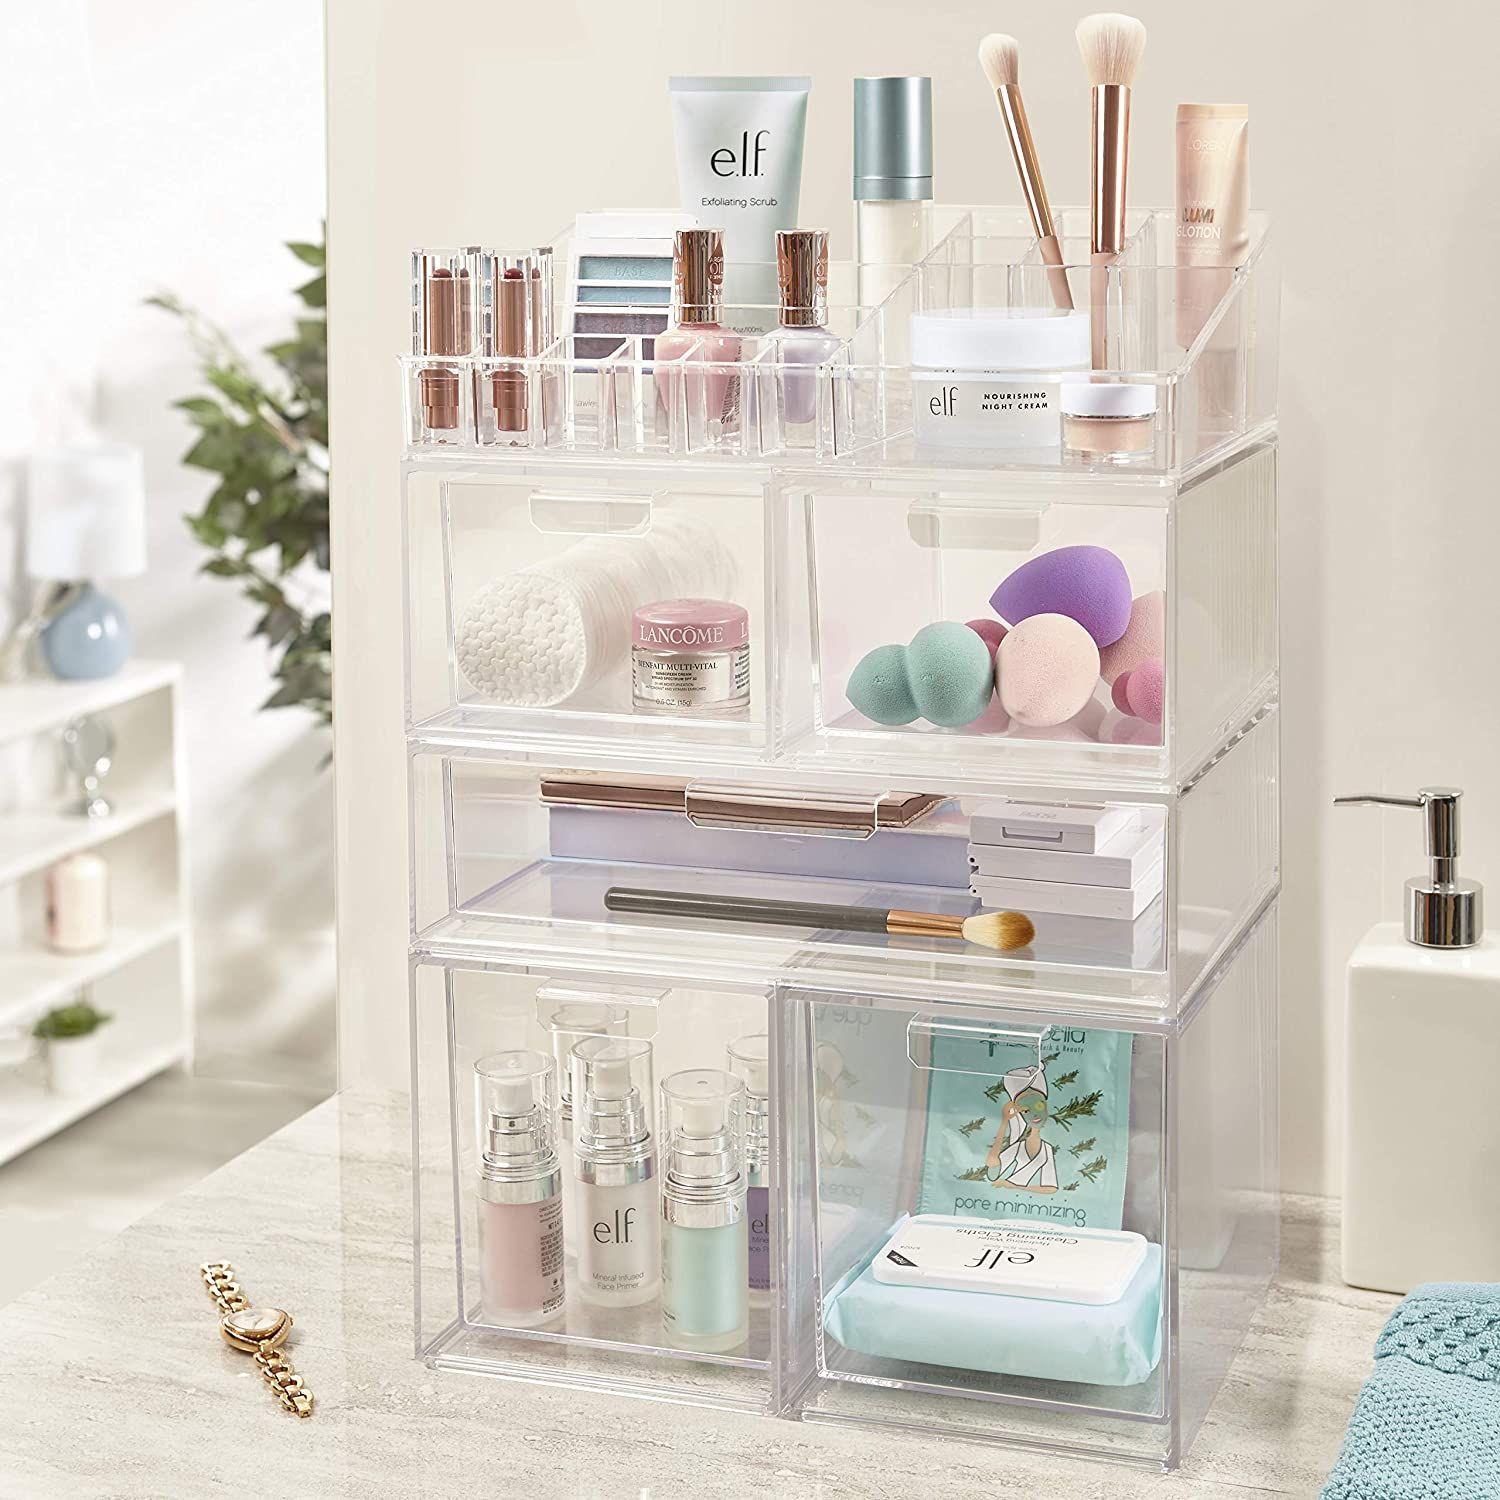 25 Cute Gifts For Organization, Shelving Tabletops And Bins Should Be Made Of